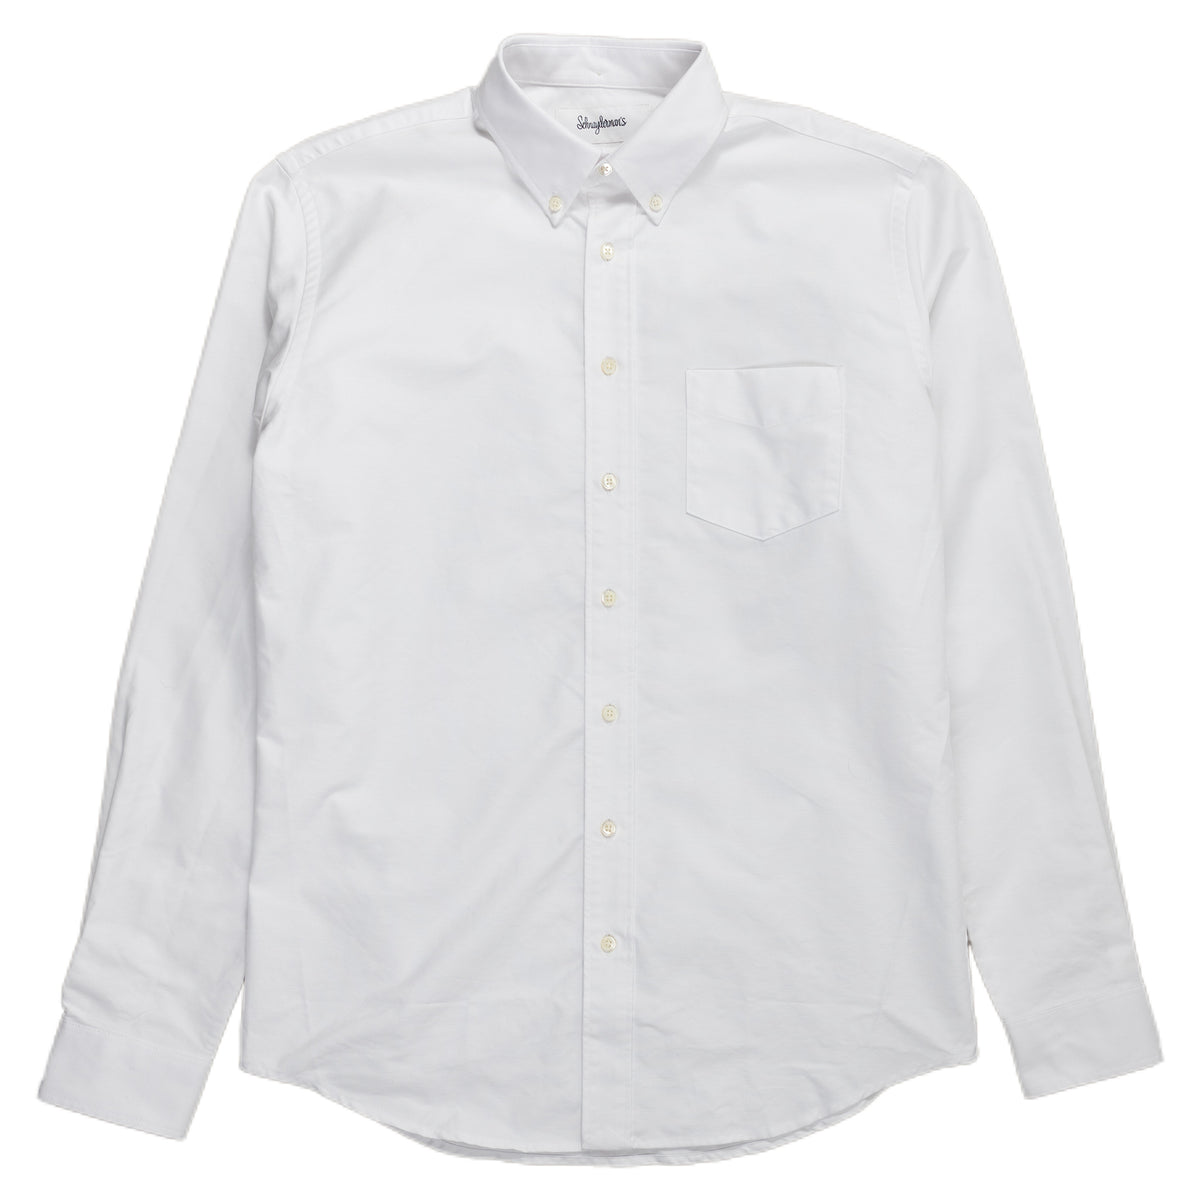 schnaydermans Shirt Oxford One button up white front